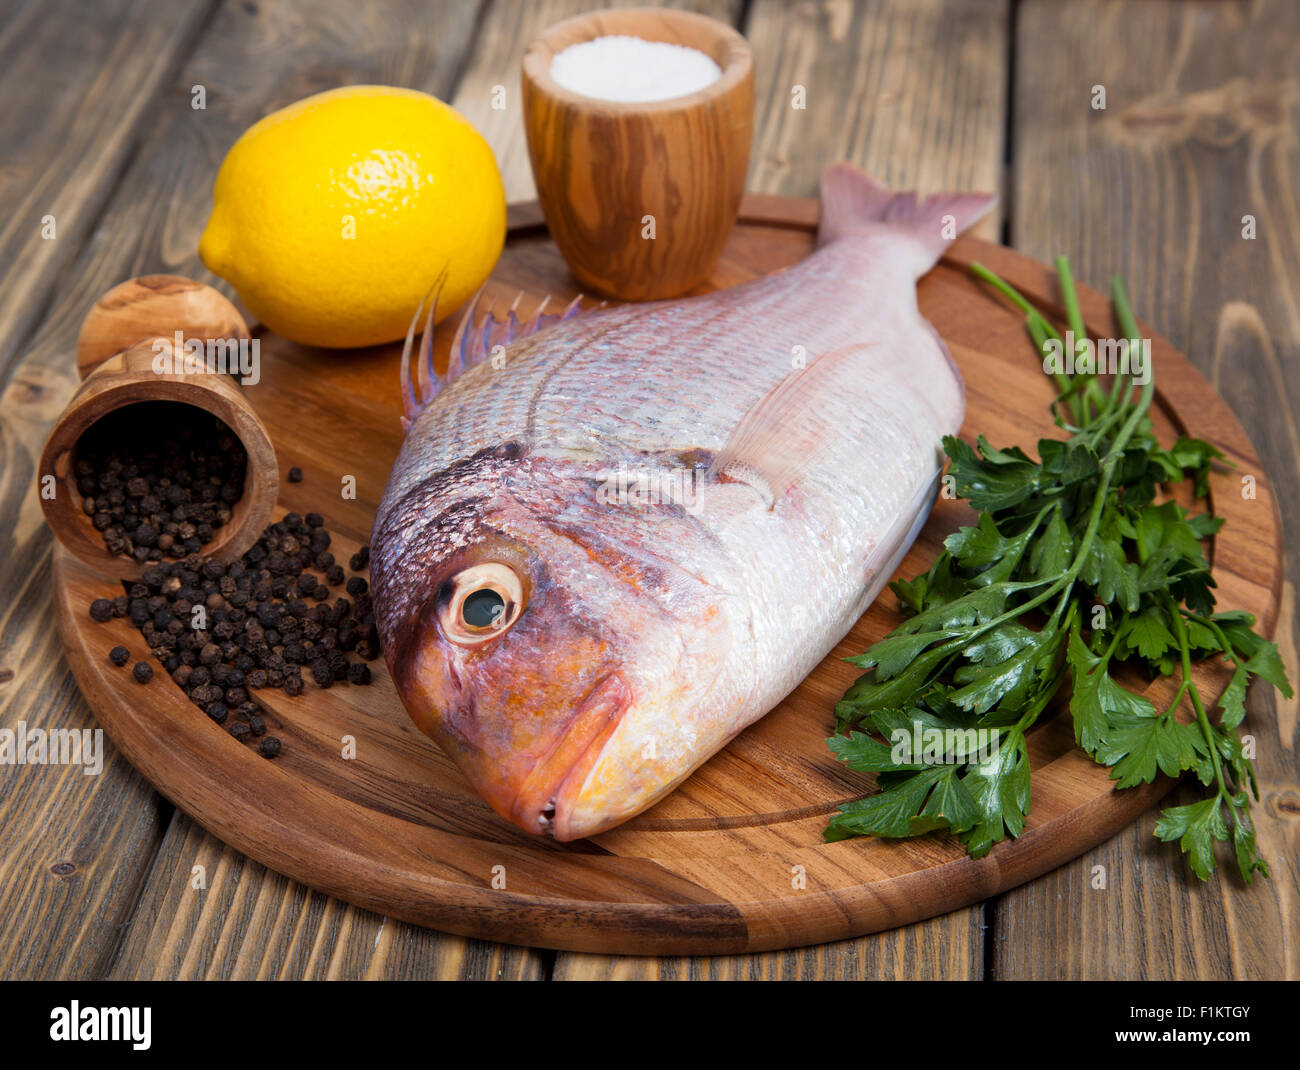 Fresh fish Pagr on a wooden board with lemon and spices Stock Photo